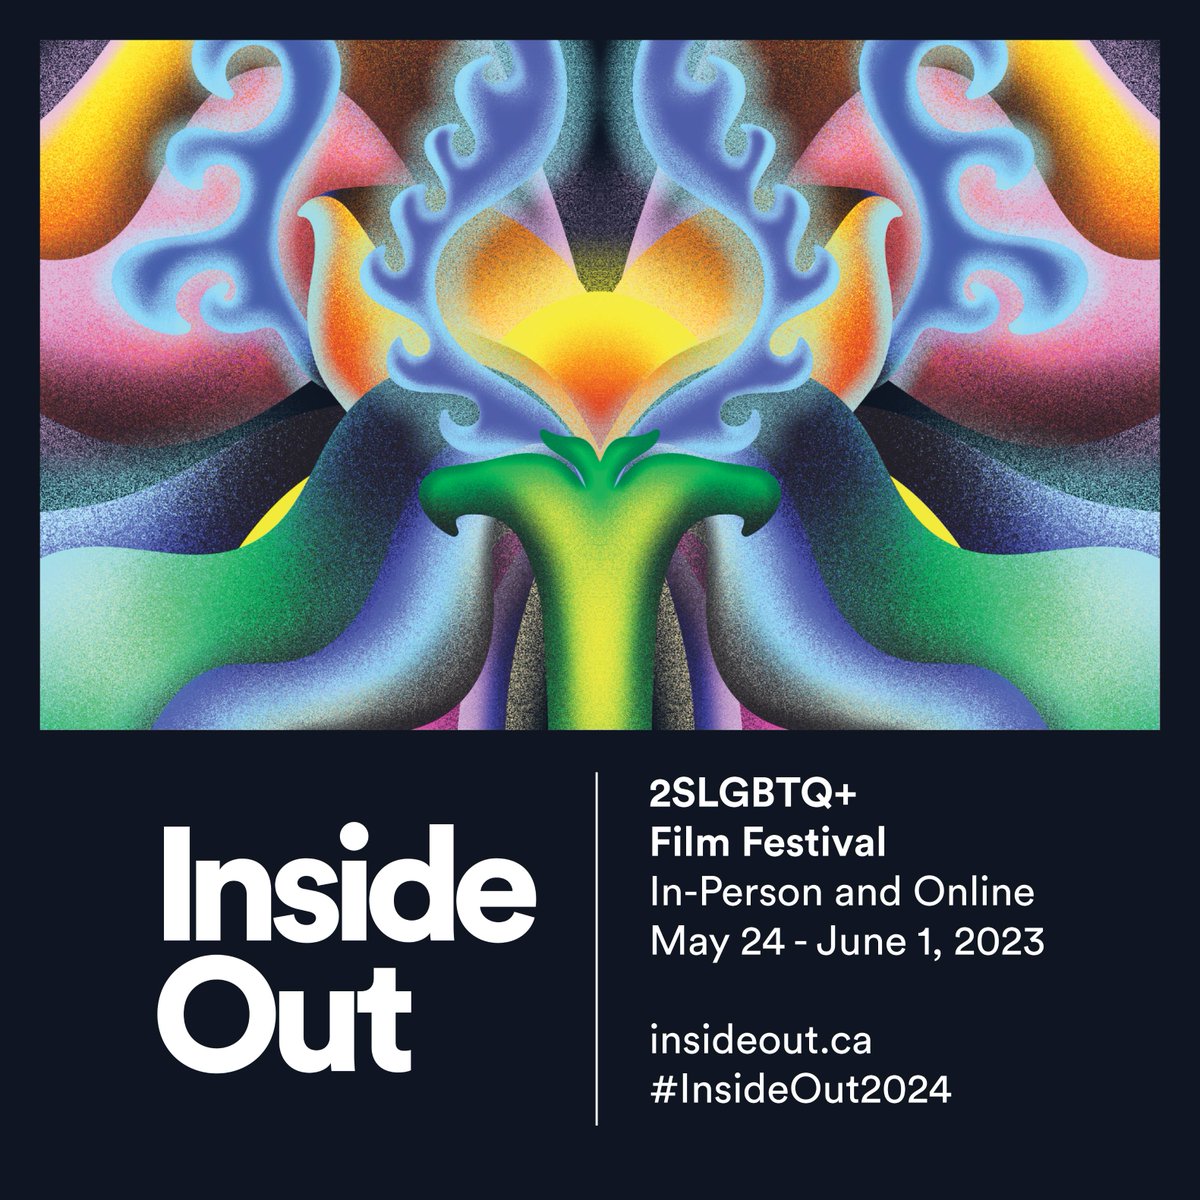 The @insideoutt 2SLGBTQ+ Film Festival is happening! Celebrate queer storytelling through screenings, industry mixers, events & more. May 24-June 1, 2024 at TIFF and streaming online Ontario-wide, be sure to secure your seats before they’re gone!
#bepridetoronto #InsideOut2024